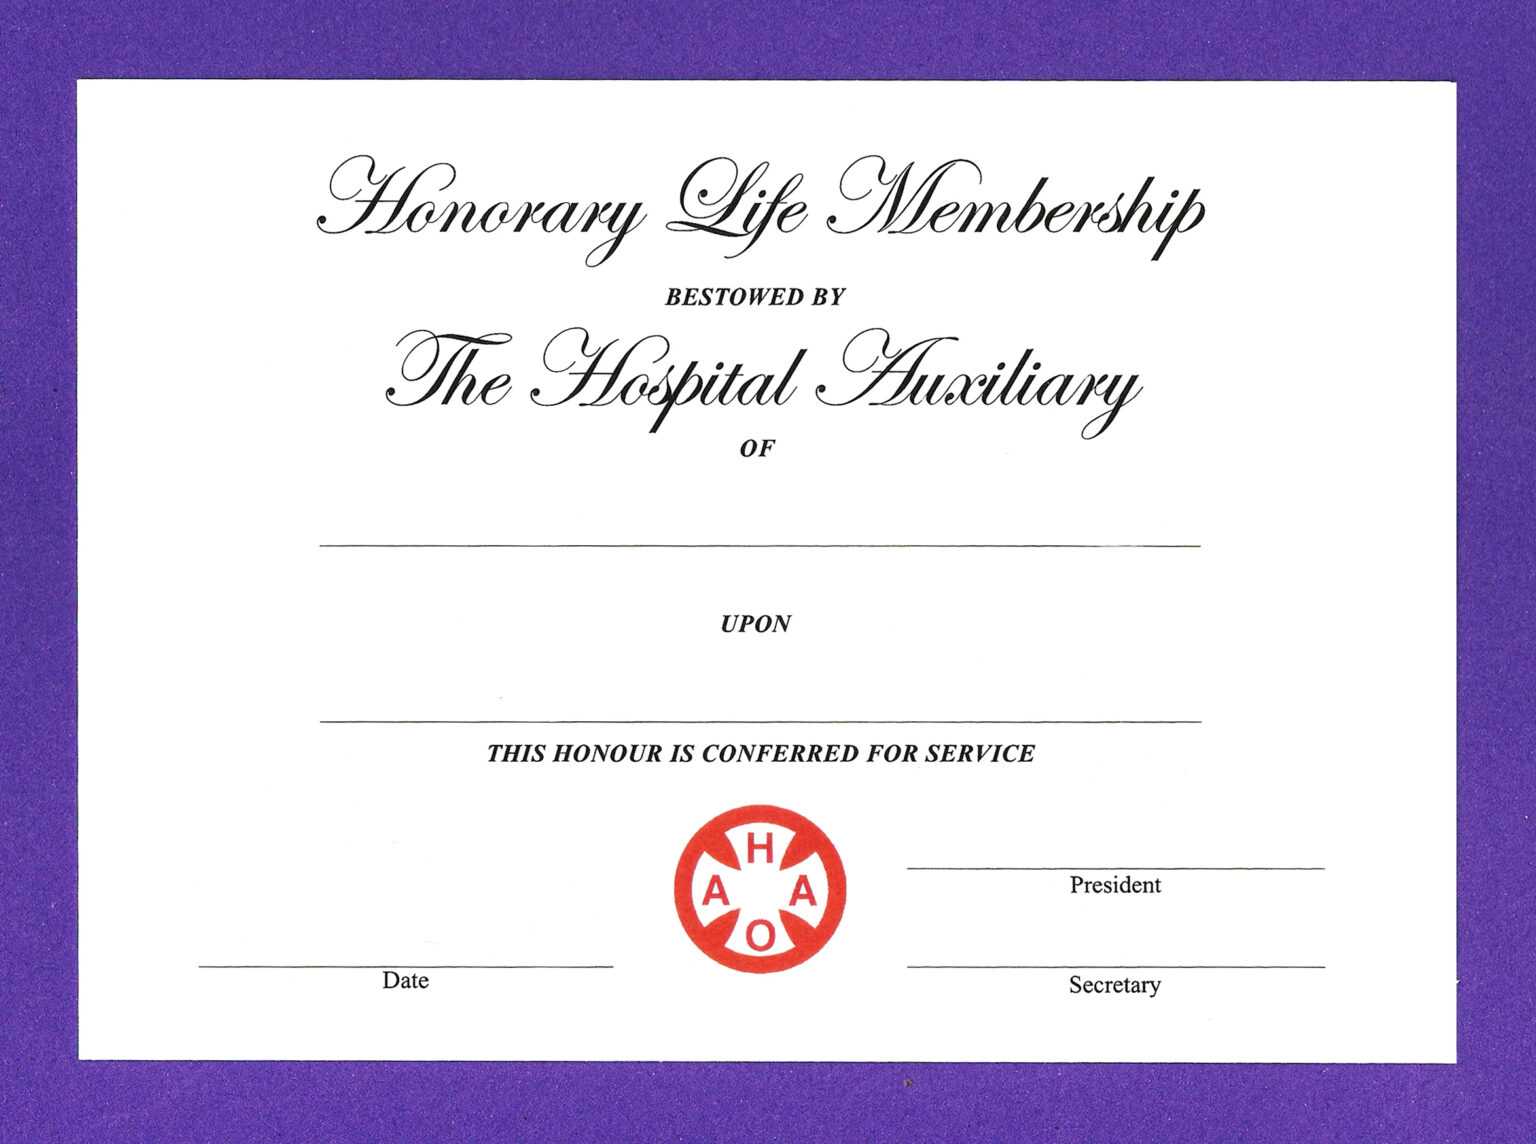 Honorary Membership Certificate Template Dalep midnightpig co With